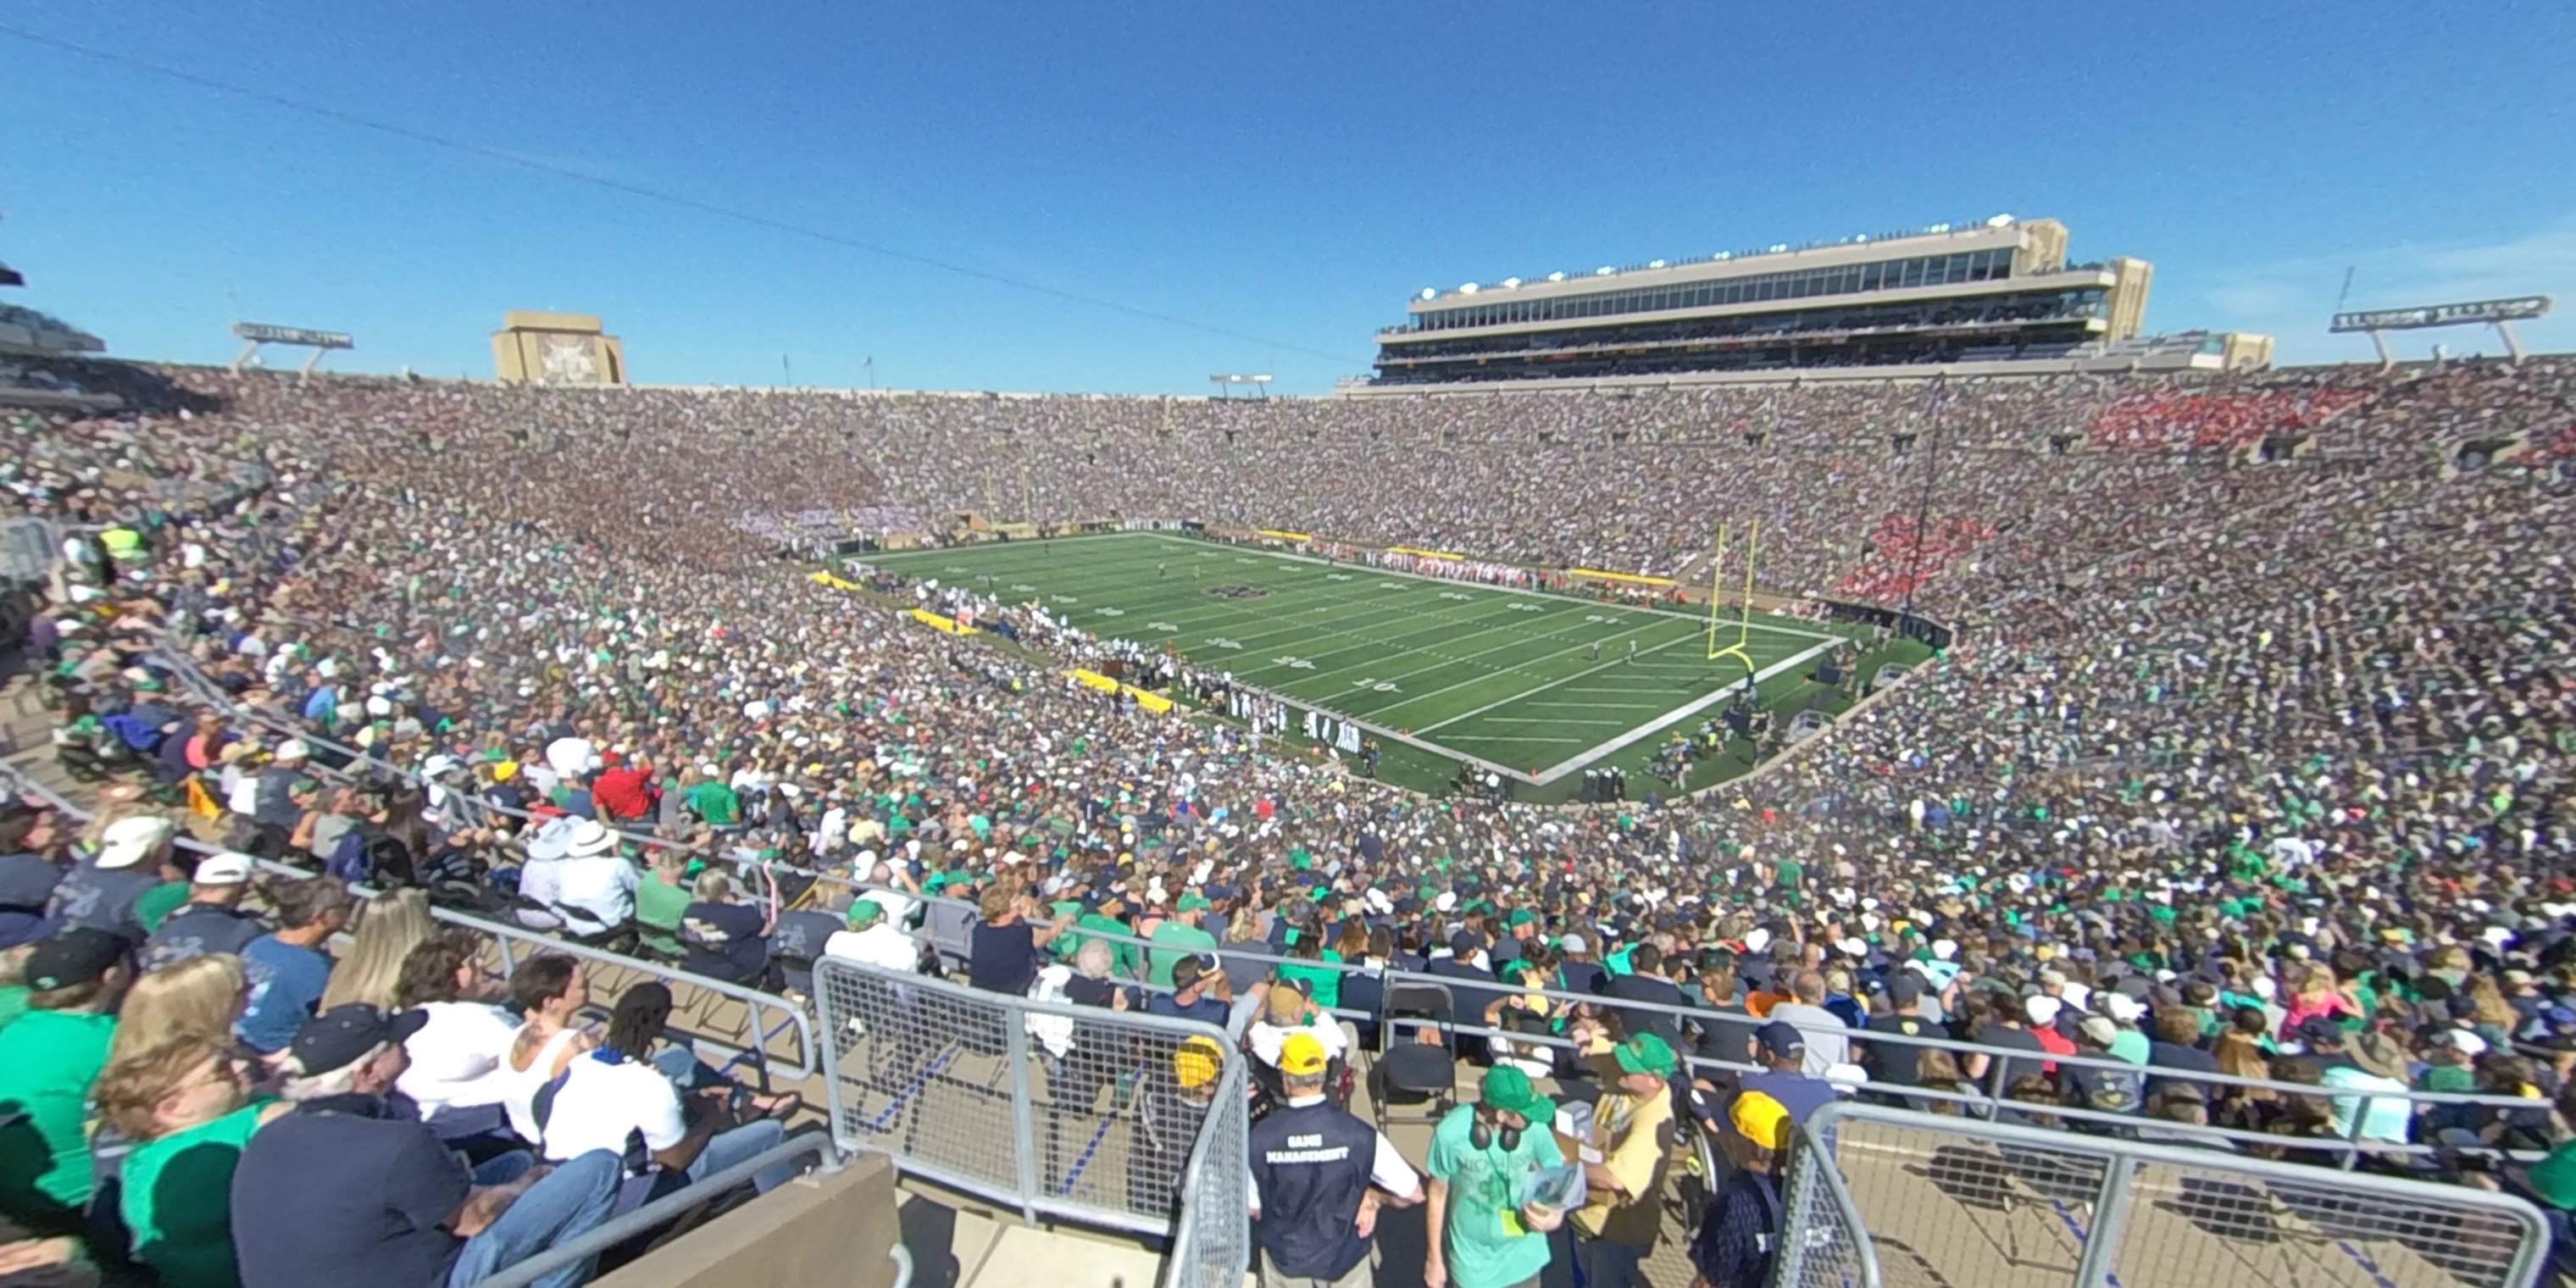 section 123 panoramic seat view  - notre dame stadium